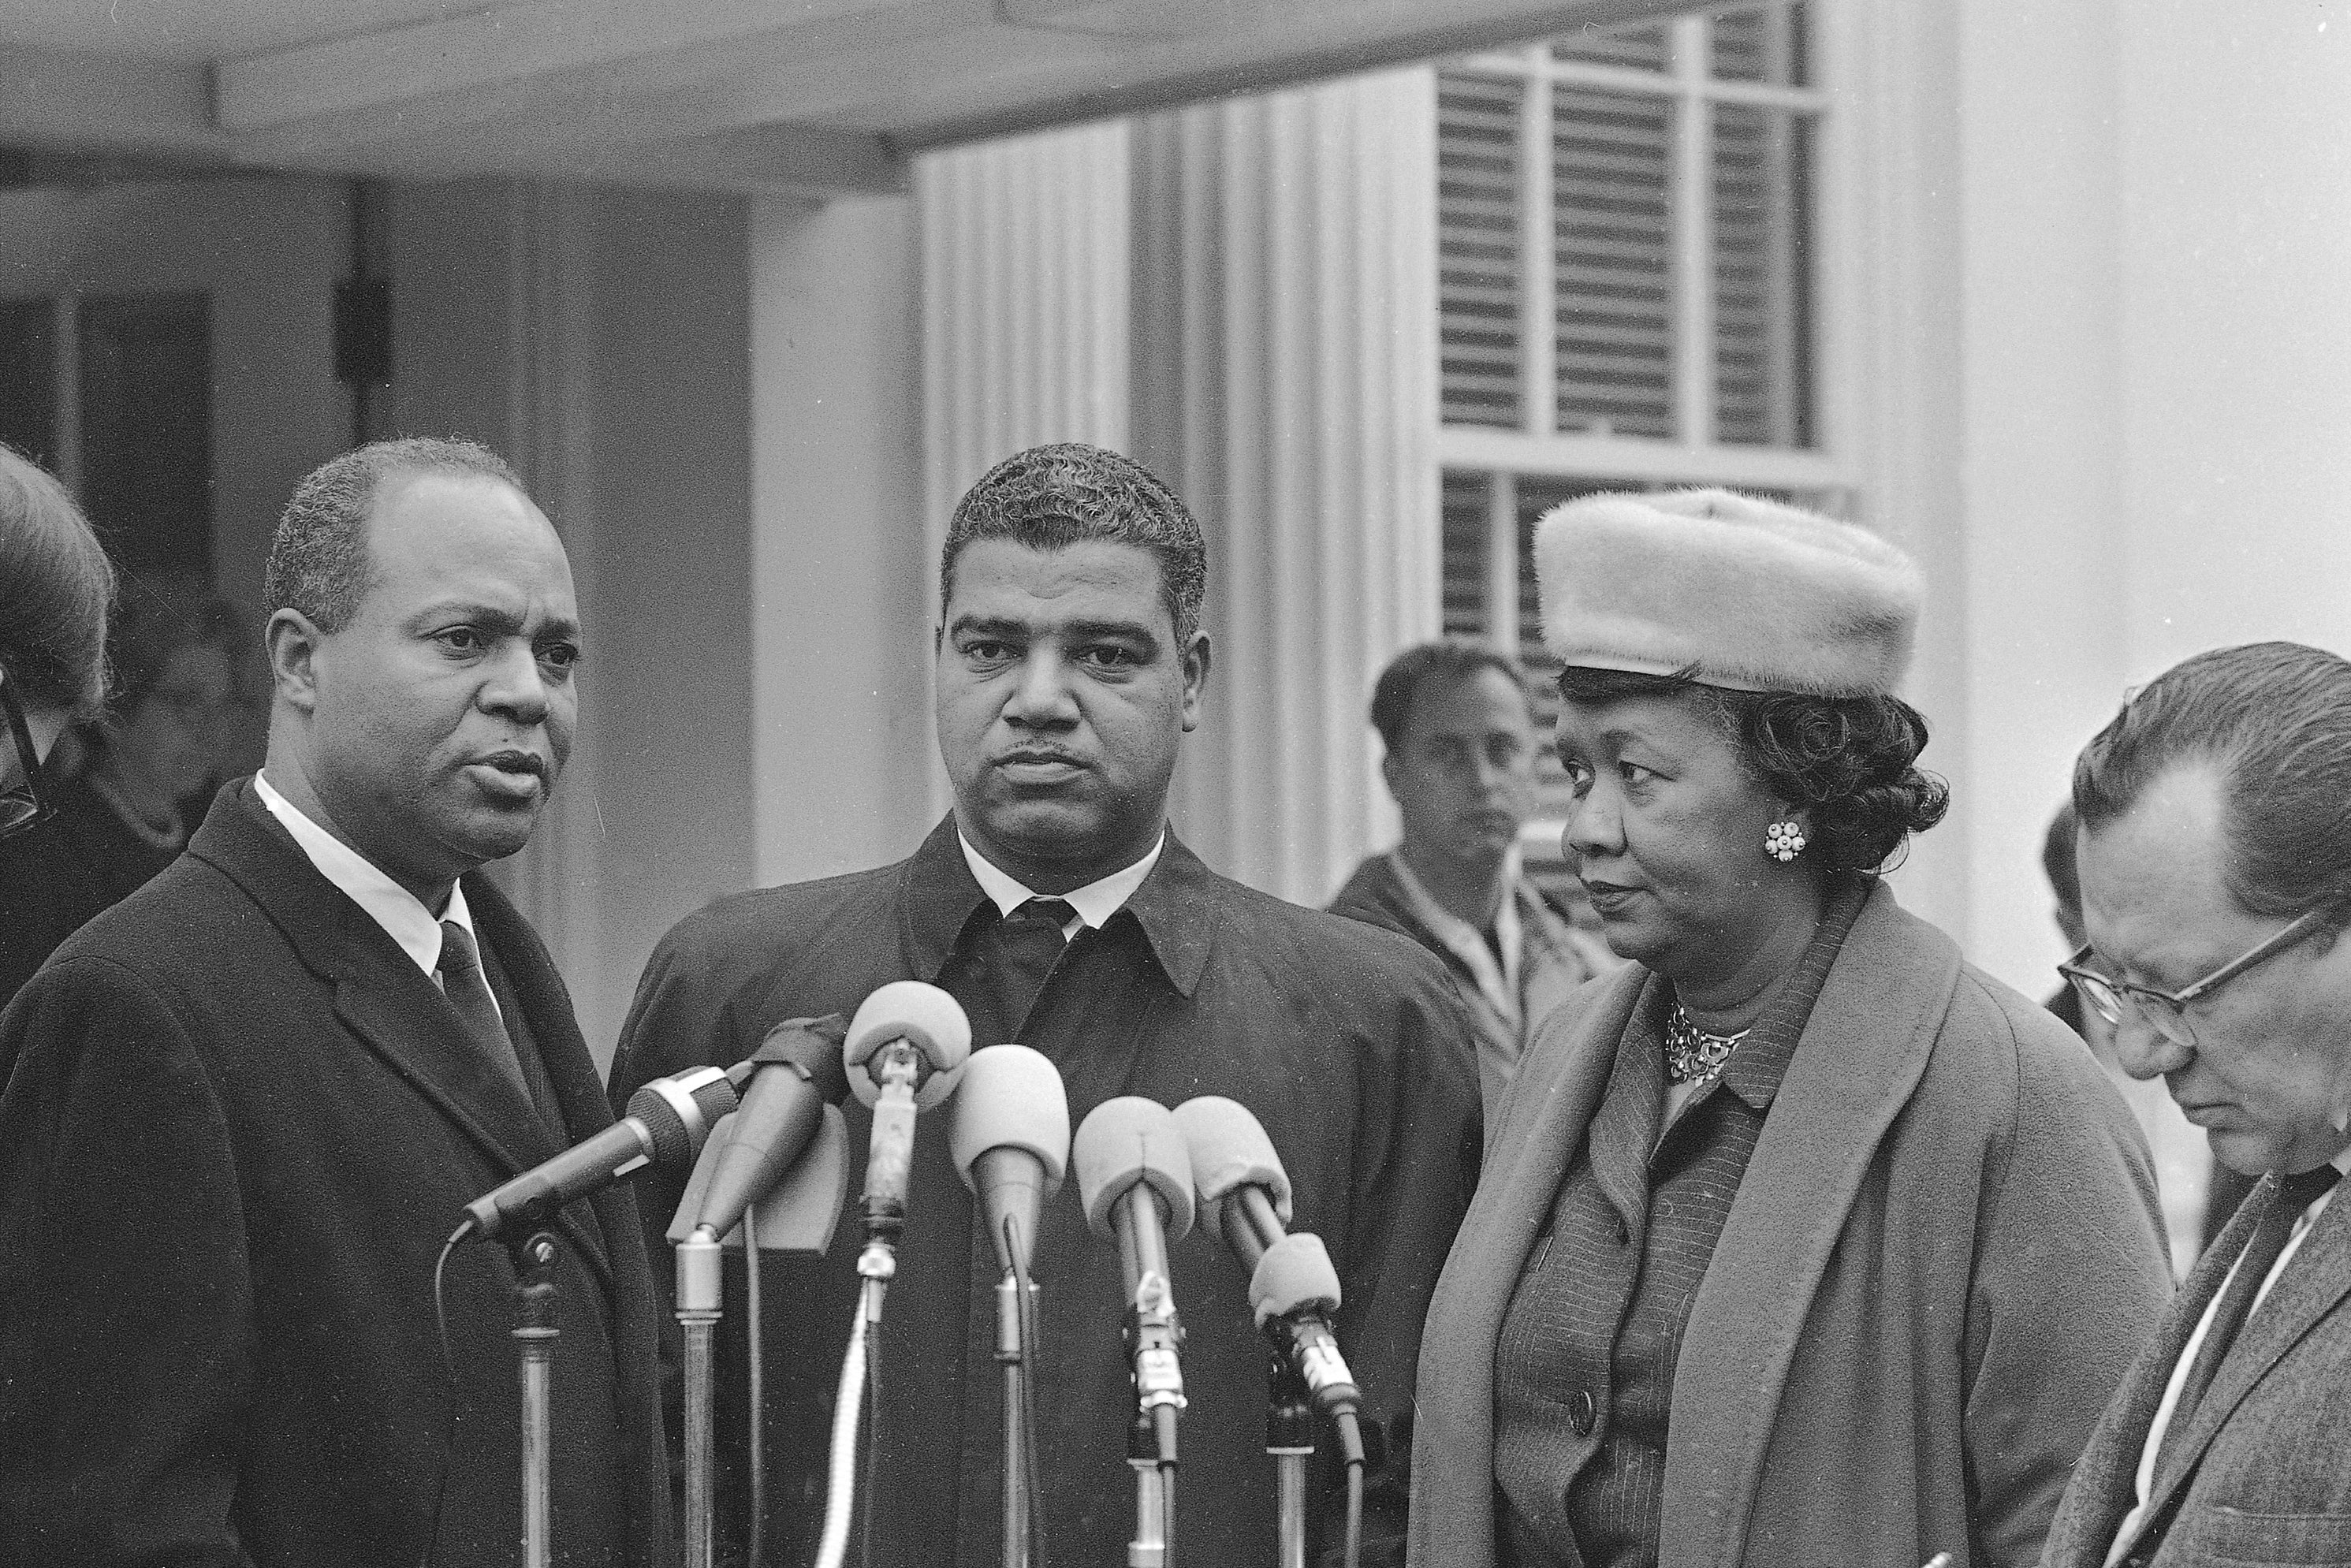 Forgotten Heroes of the Civil Rights Movement